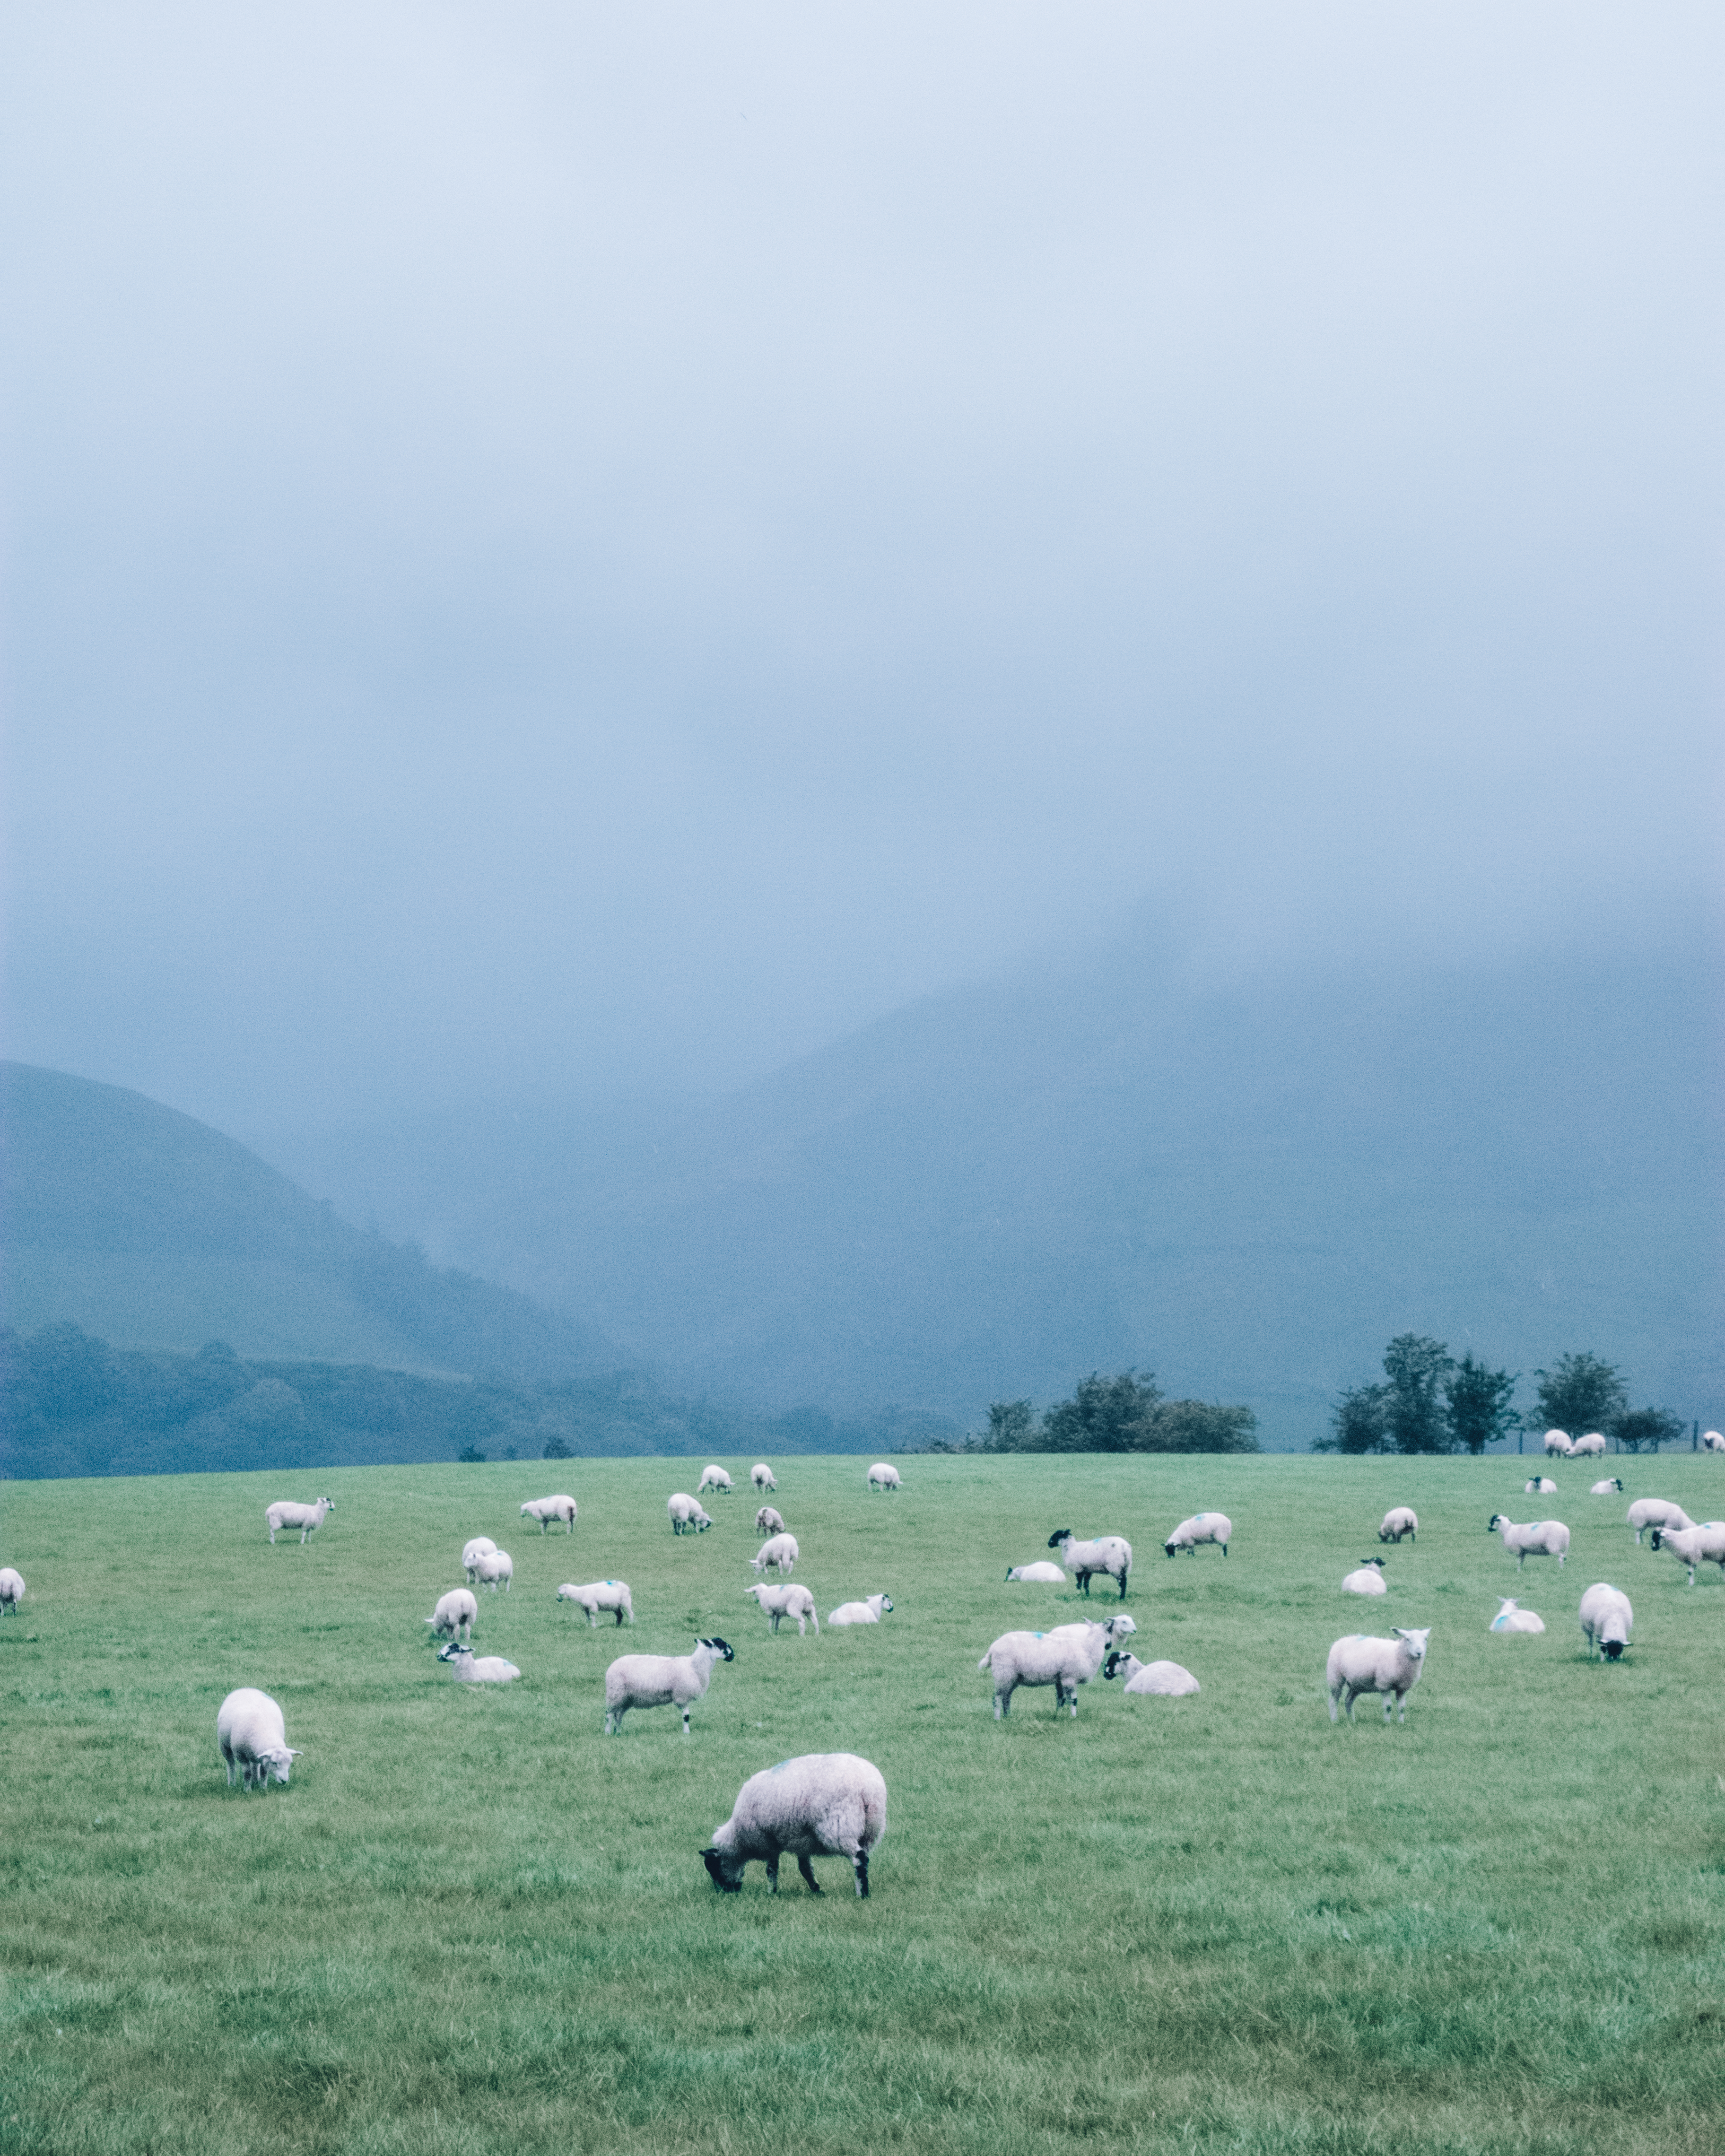 Rainy, foggy clouds above a field of sheep on a wet day in the Lake District